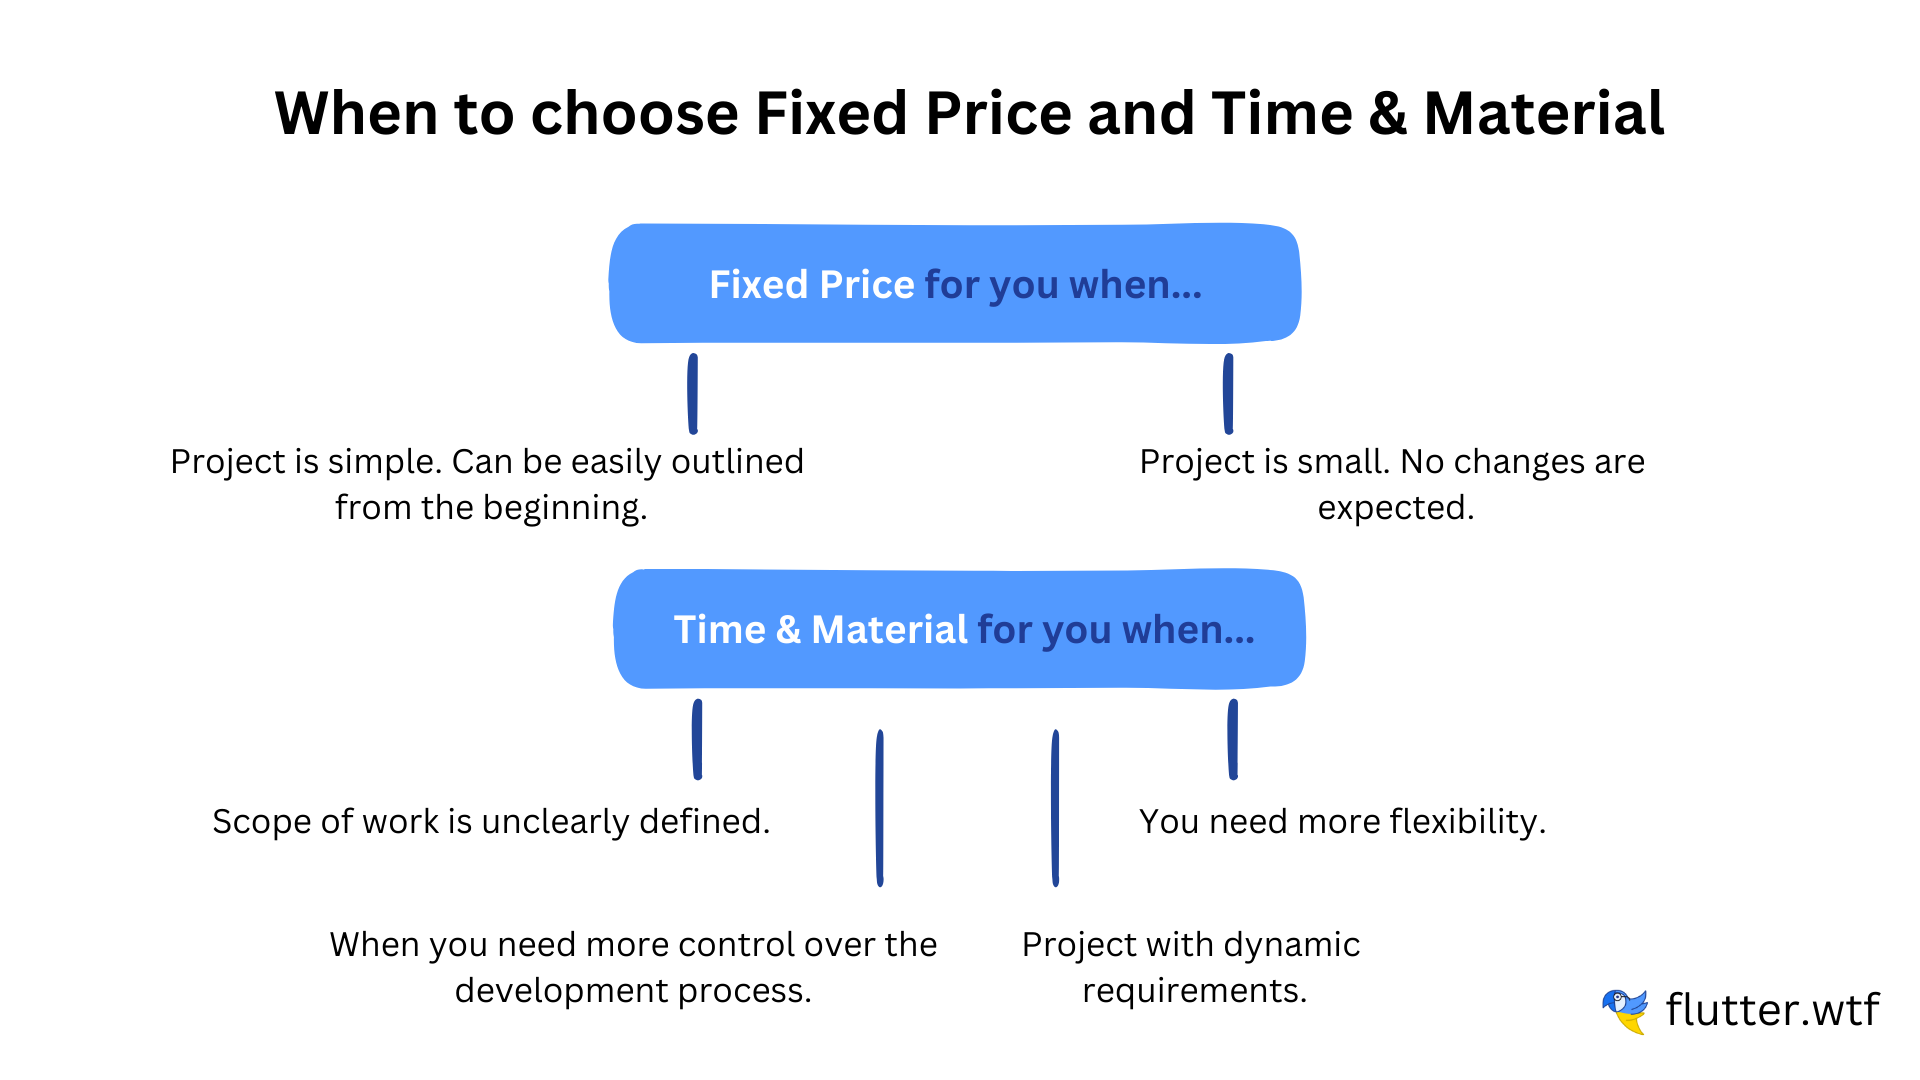 Use Cases: Fixed Price and Time and Material